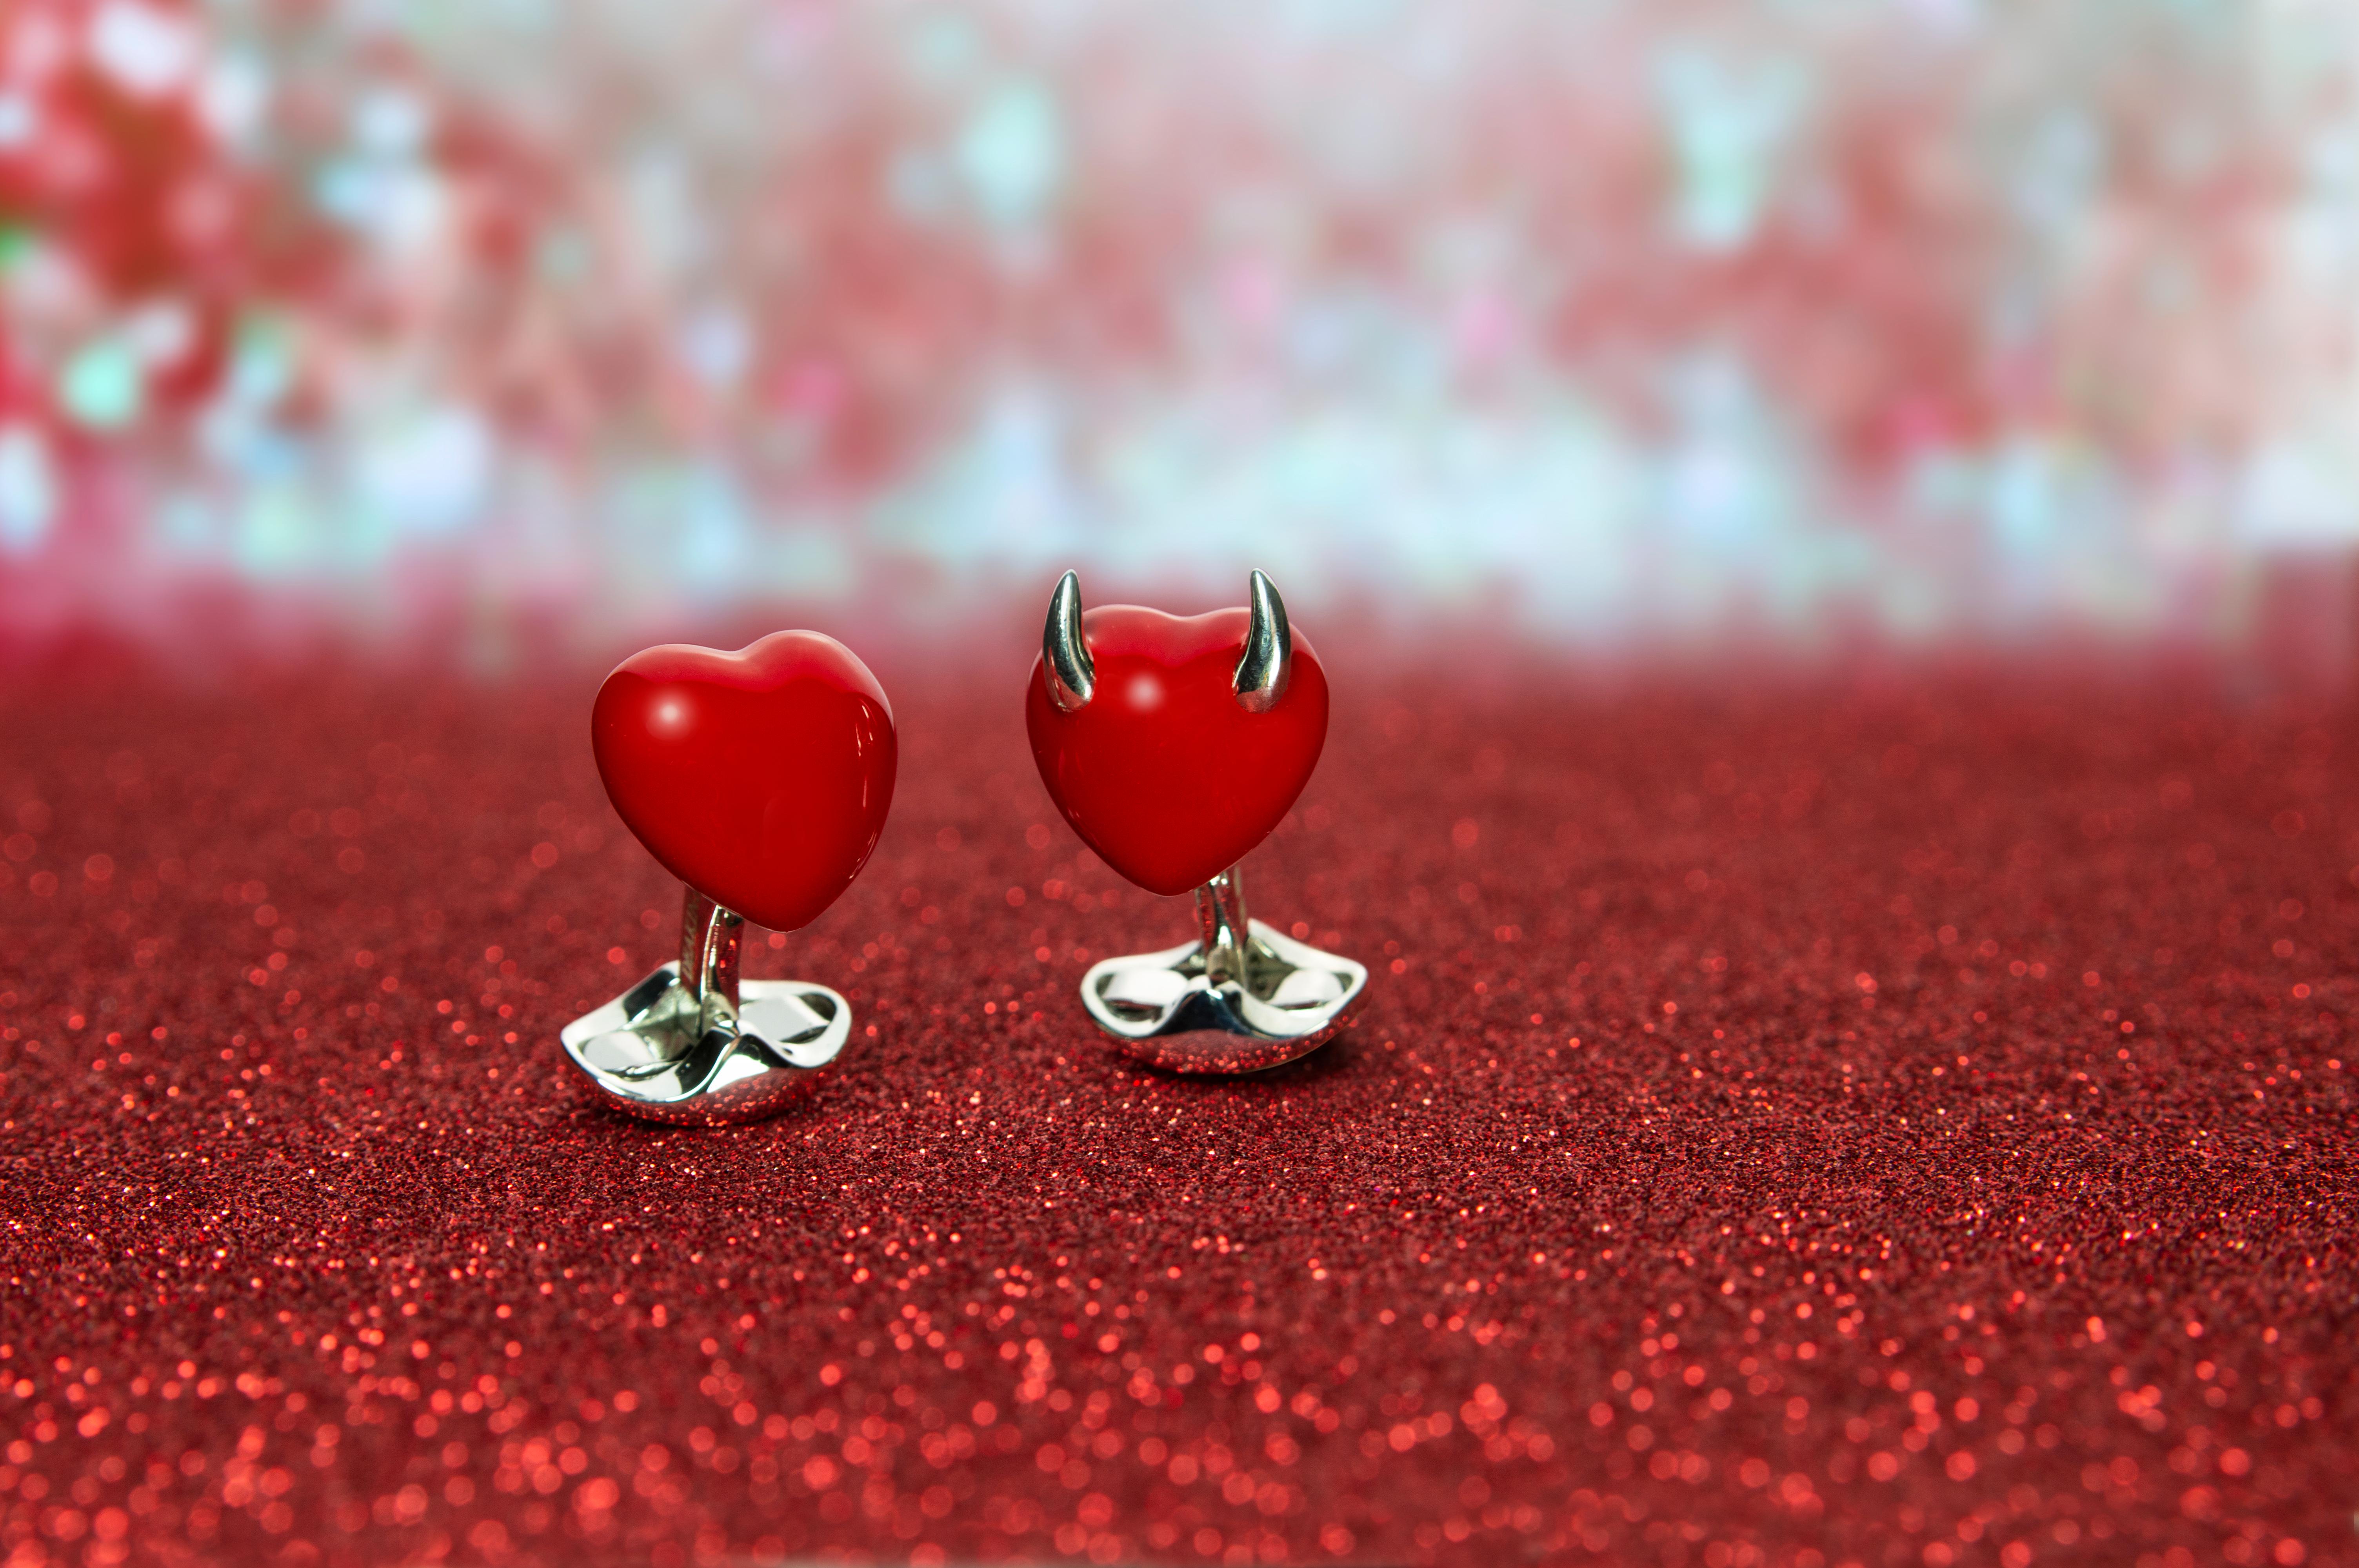 DEAKIN & FRANCIS, Piccadilly Arcade, London

Whether he's the king of your heart or a naughty devil, these good and bad heart cufflinks are perfect for gentlemen with a cheeky side!

Hand-enamelled in a vibrant red, these cufflinks are sure to stand